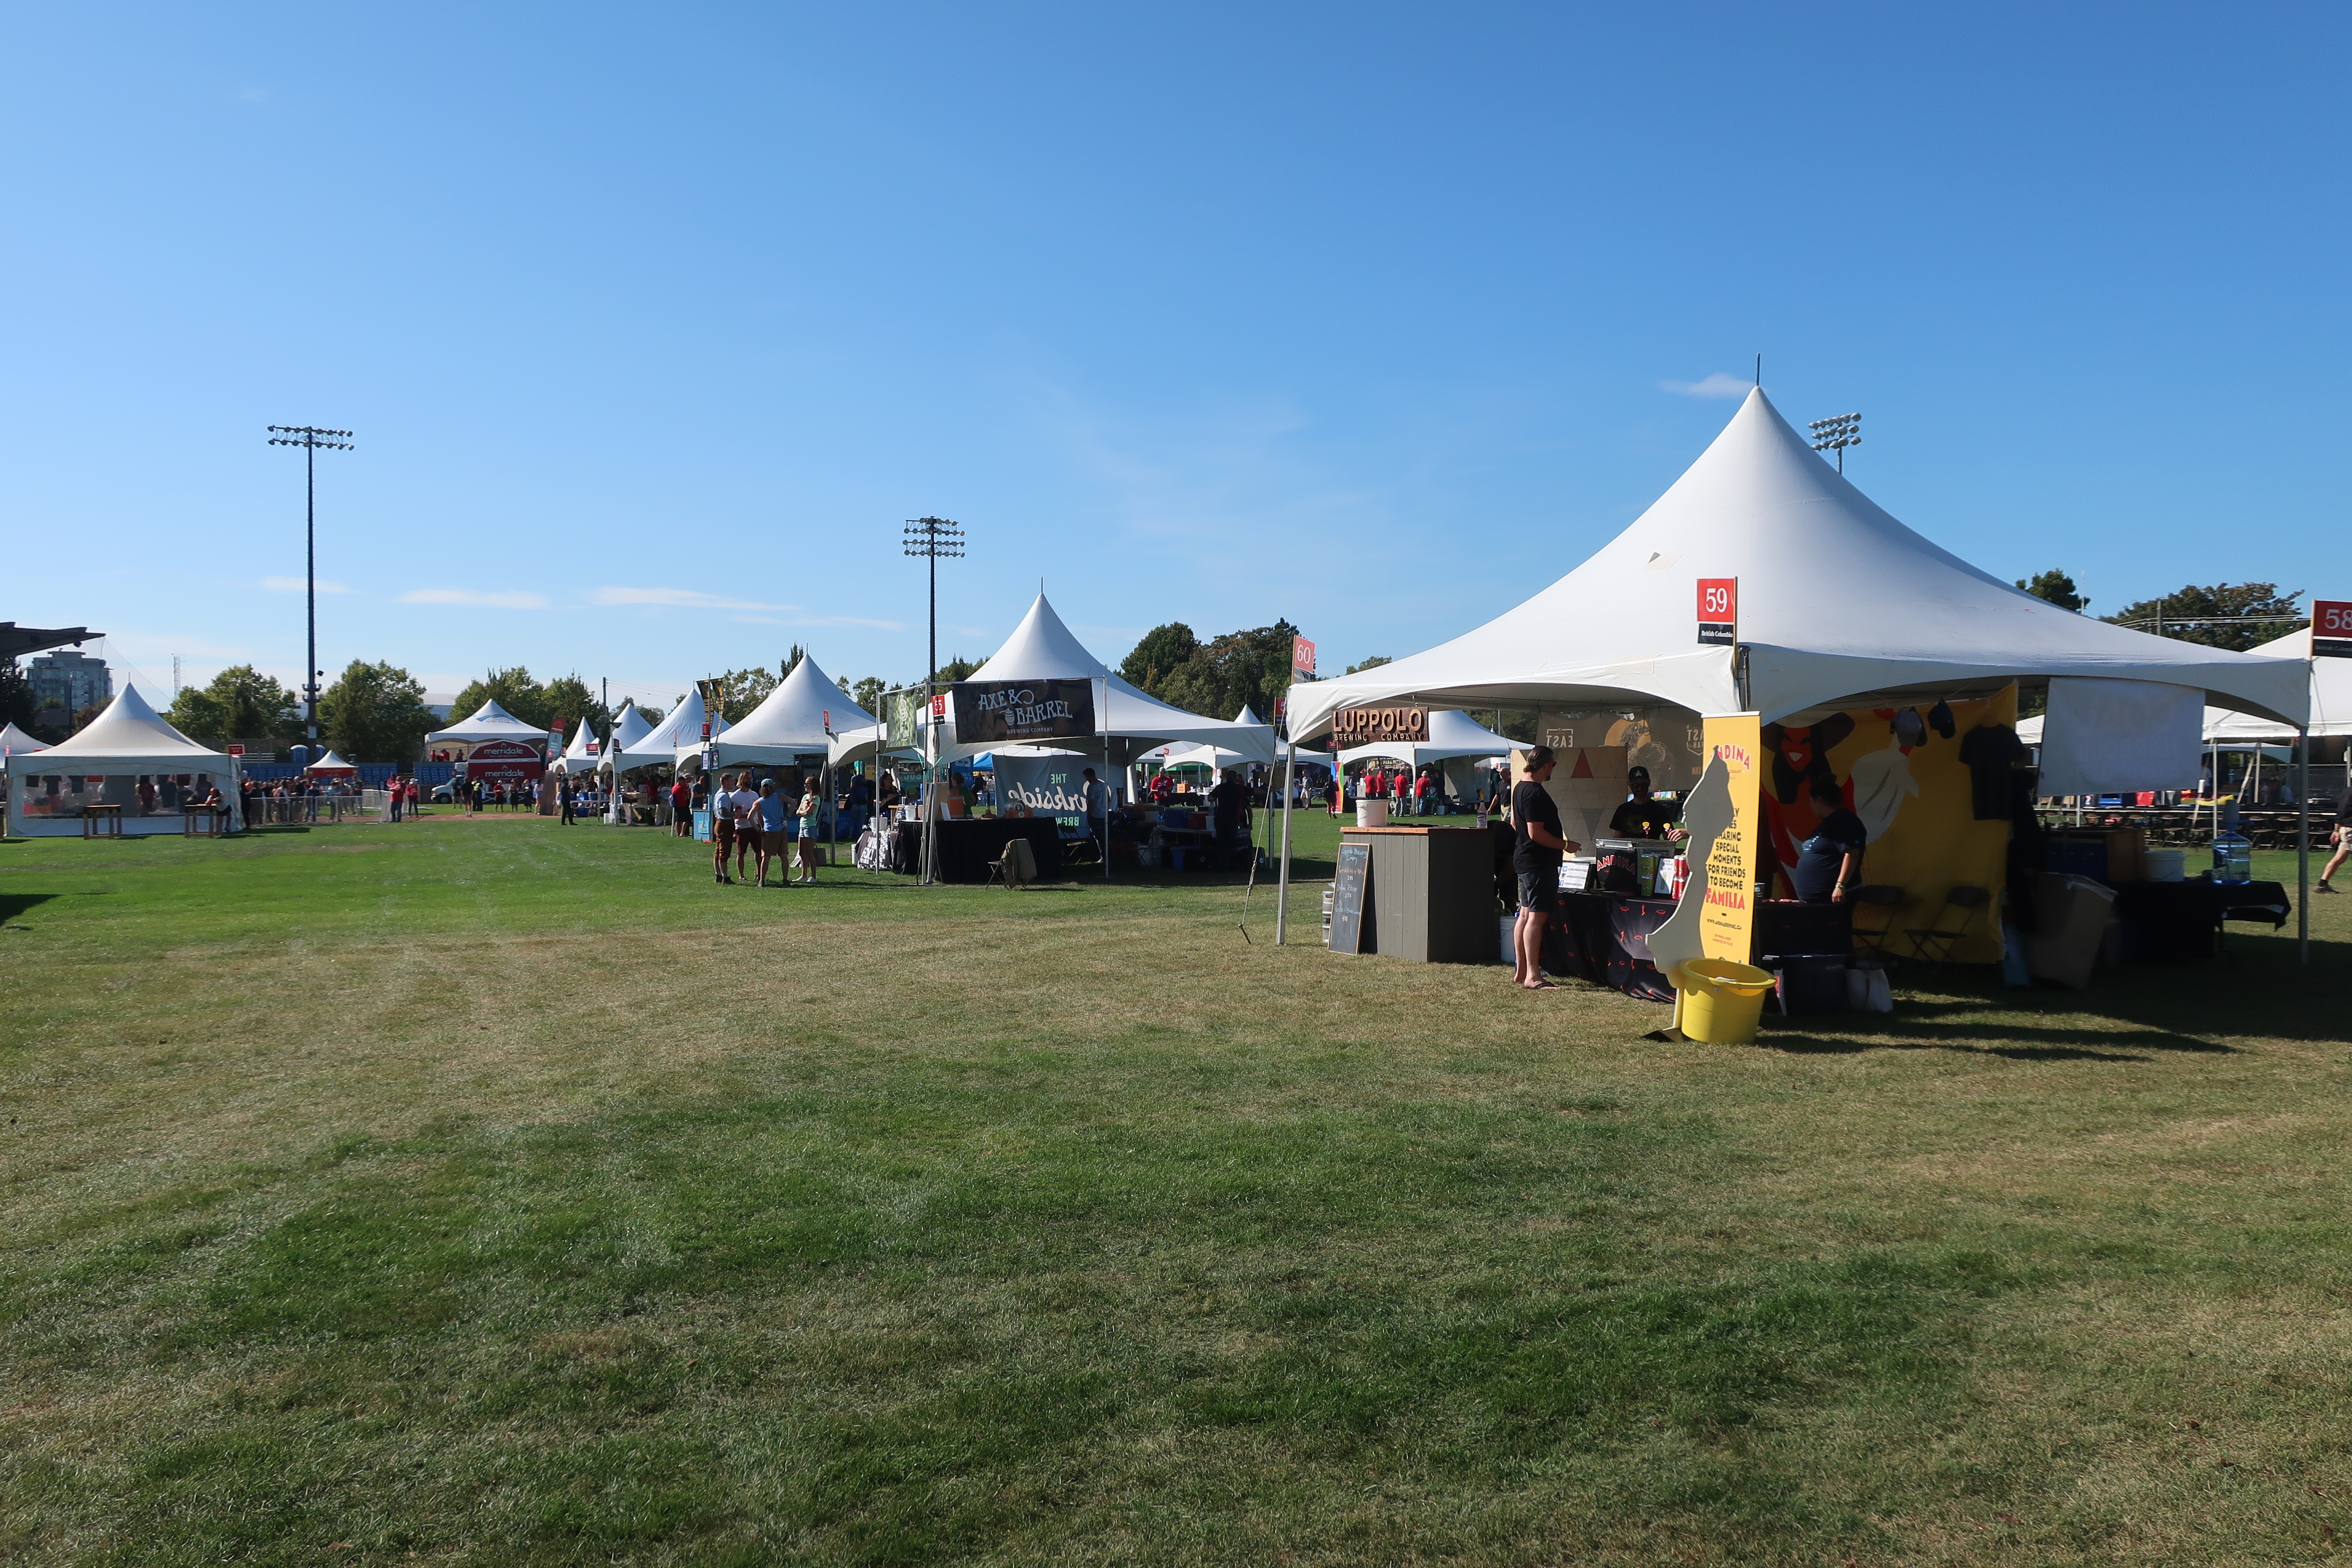 The festival grounds at the 2019 Great Canadian Beer Festival prior to opening.